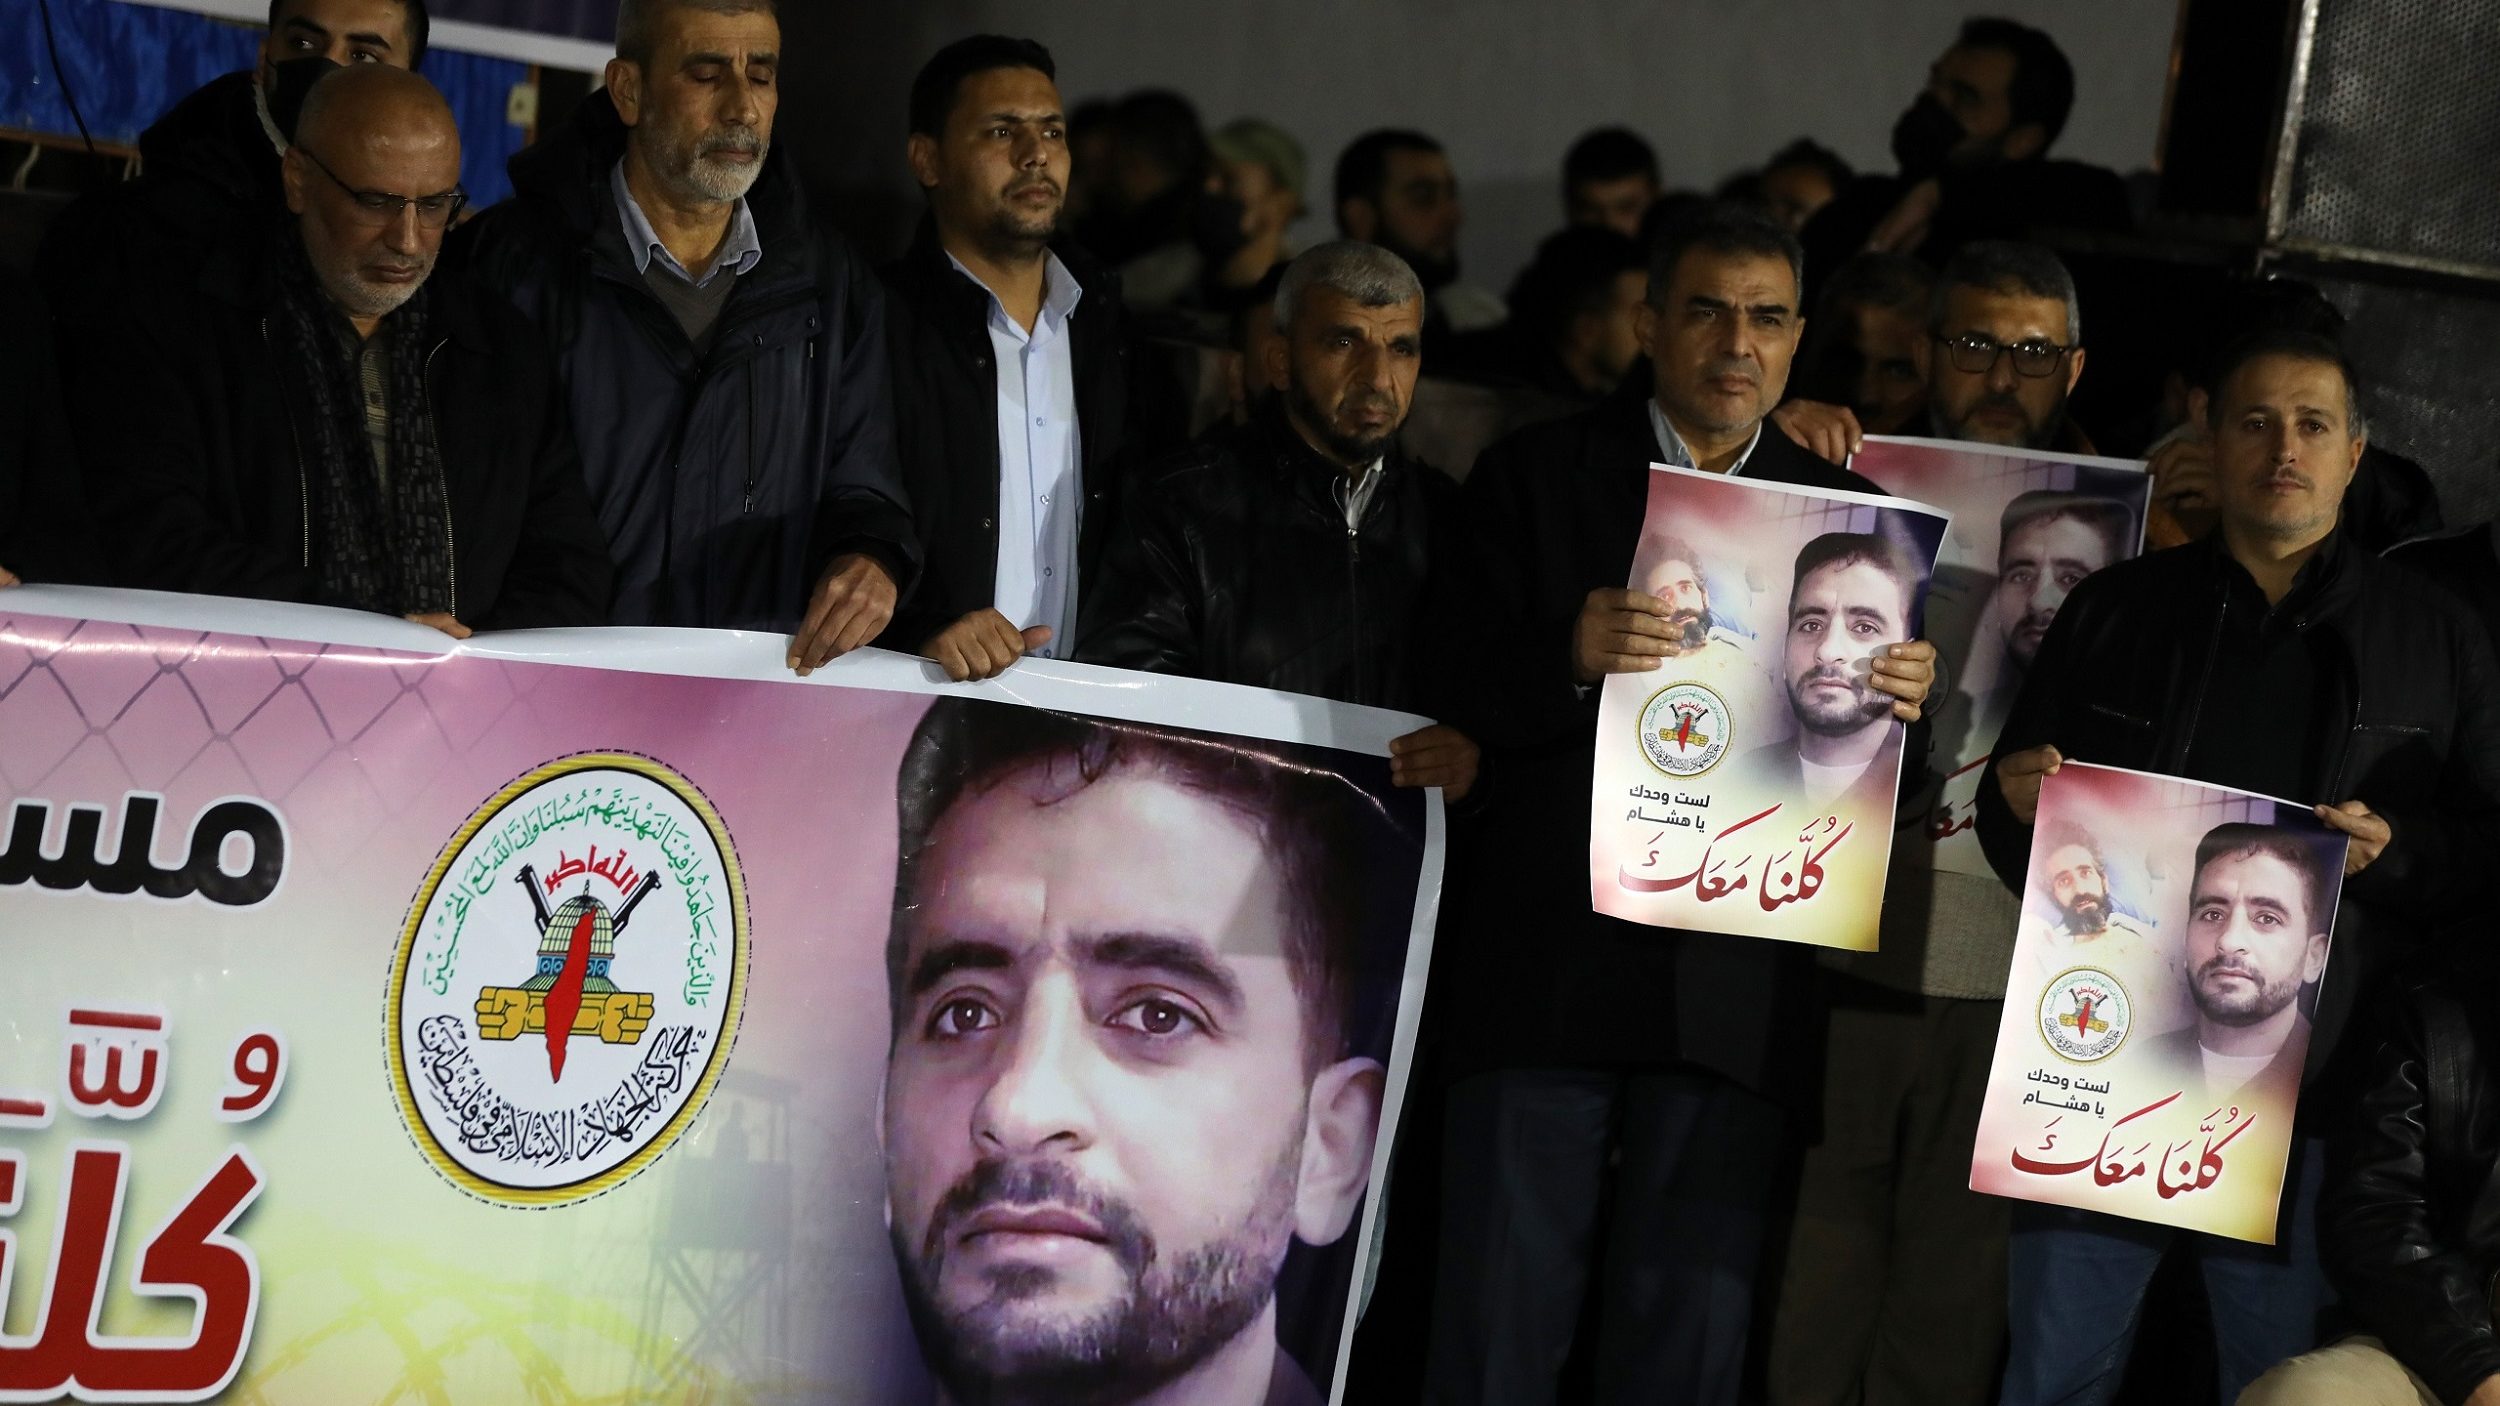 Palestinian Detainees Boycott Israeli Courts in Support of Hunger-striker